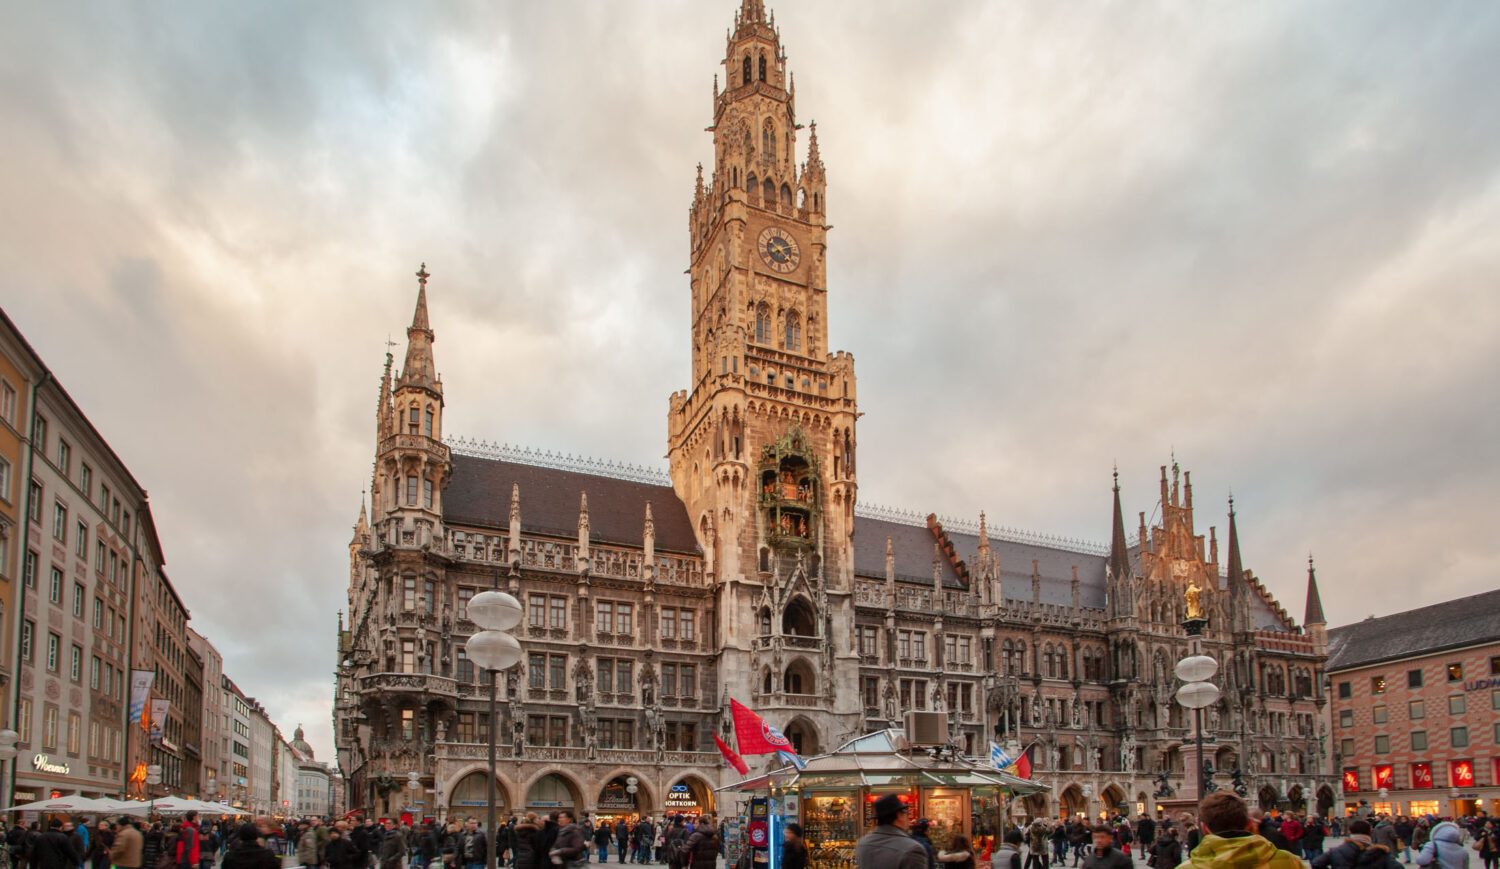 Especially around sights there is often a lot of hustle and bustle, like here at Munich City Hall